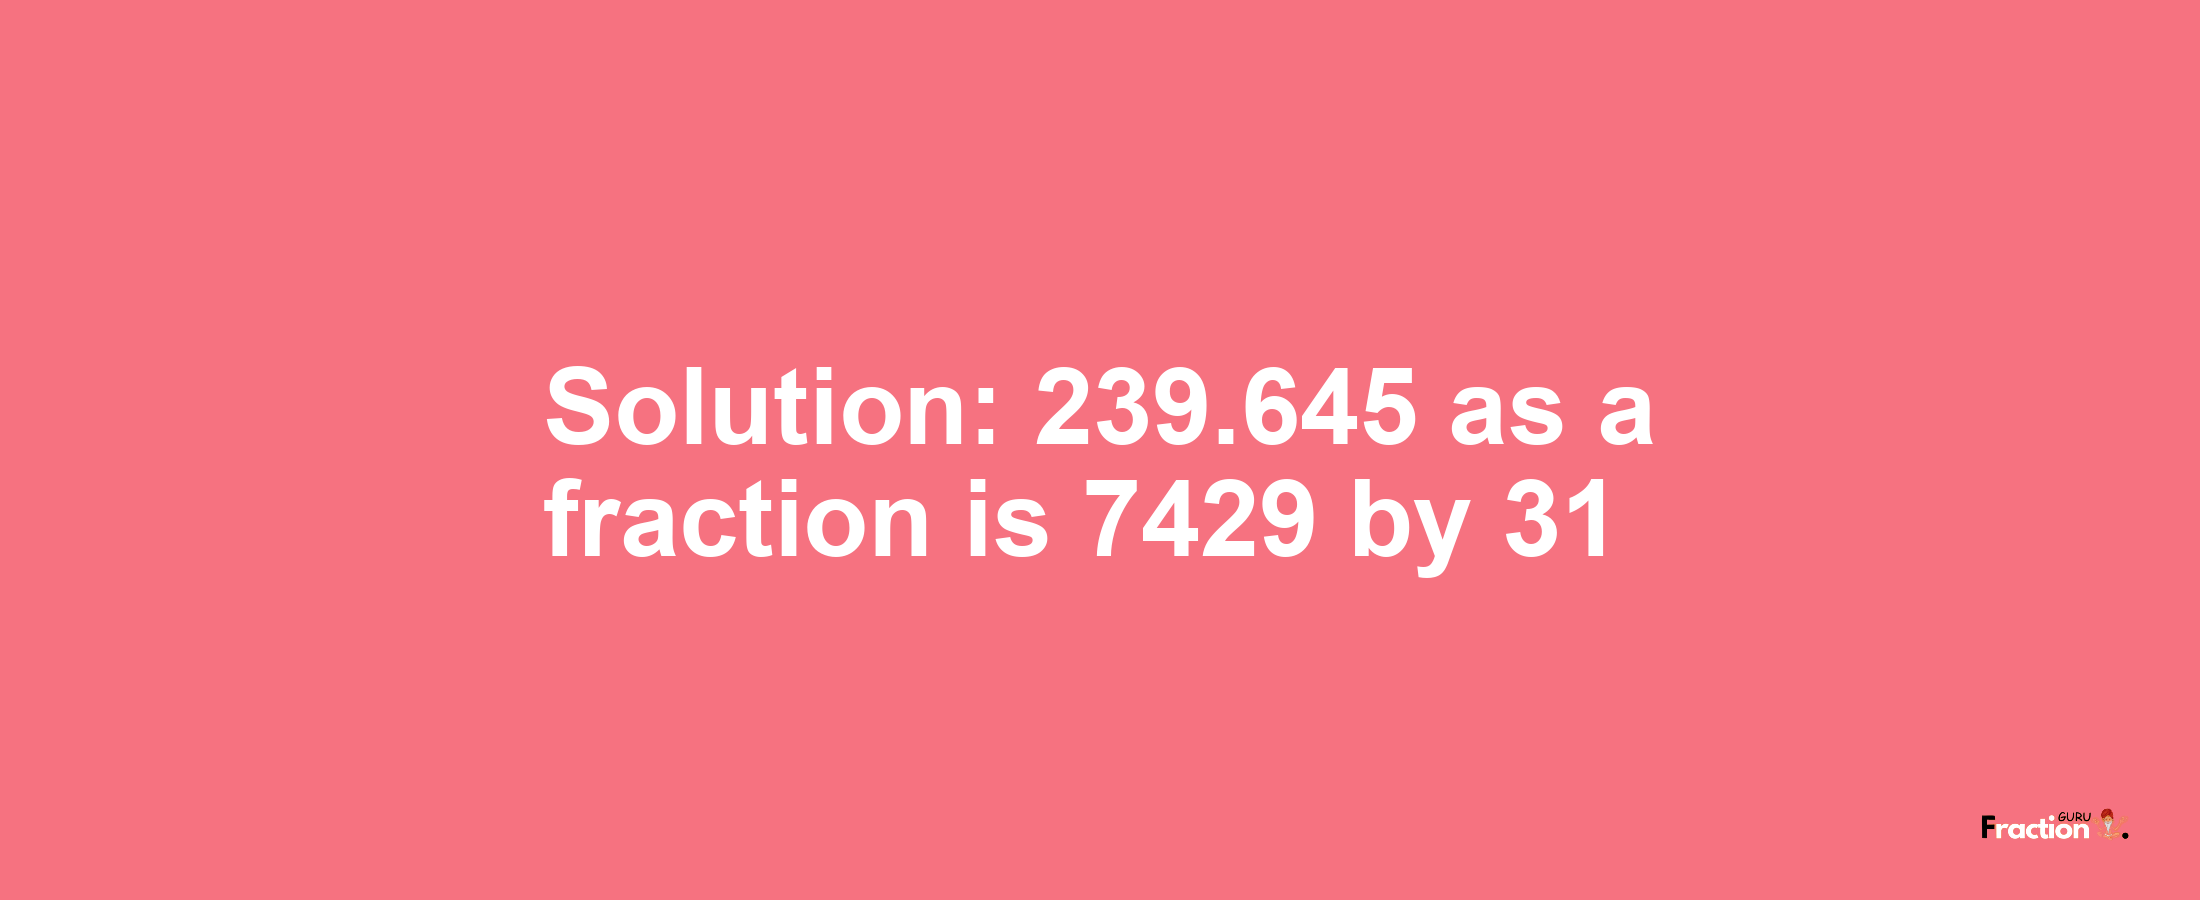 Solution:239.645 as a fraction is 7429/31